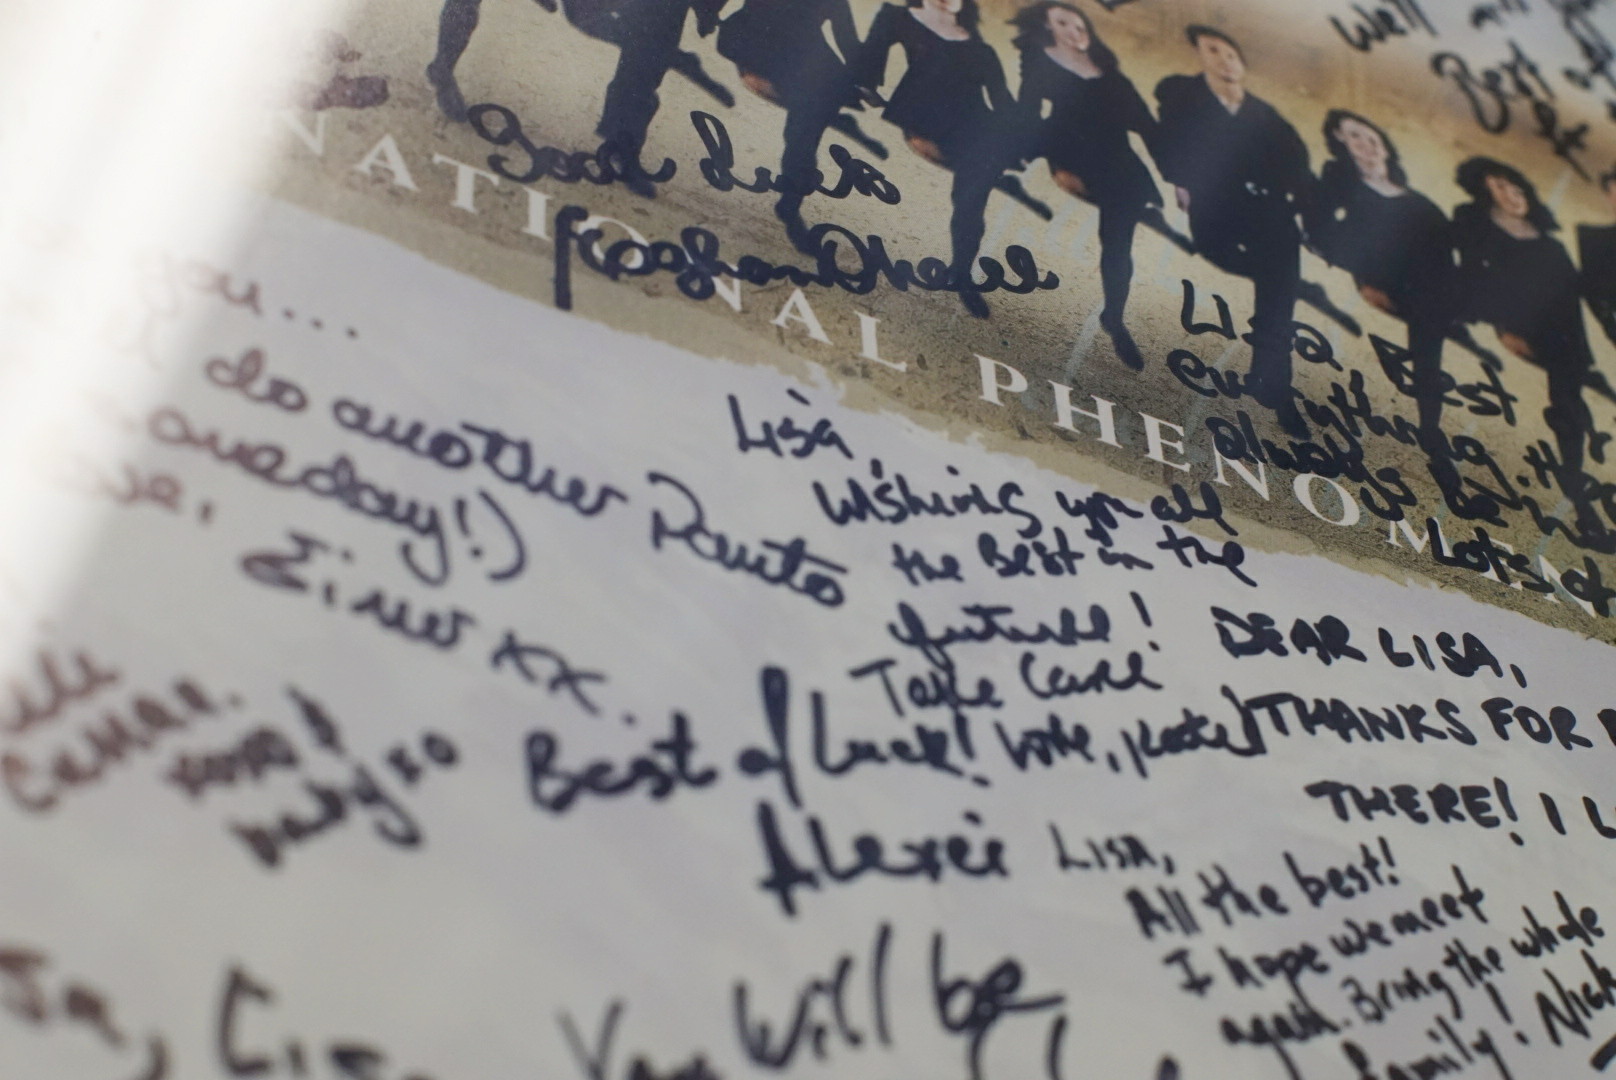 A Riverdance poster dotted with signatures of the group adorns a wall in the studio